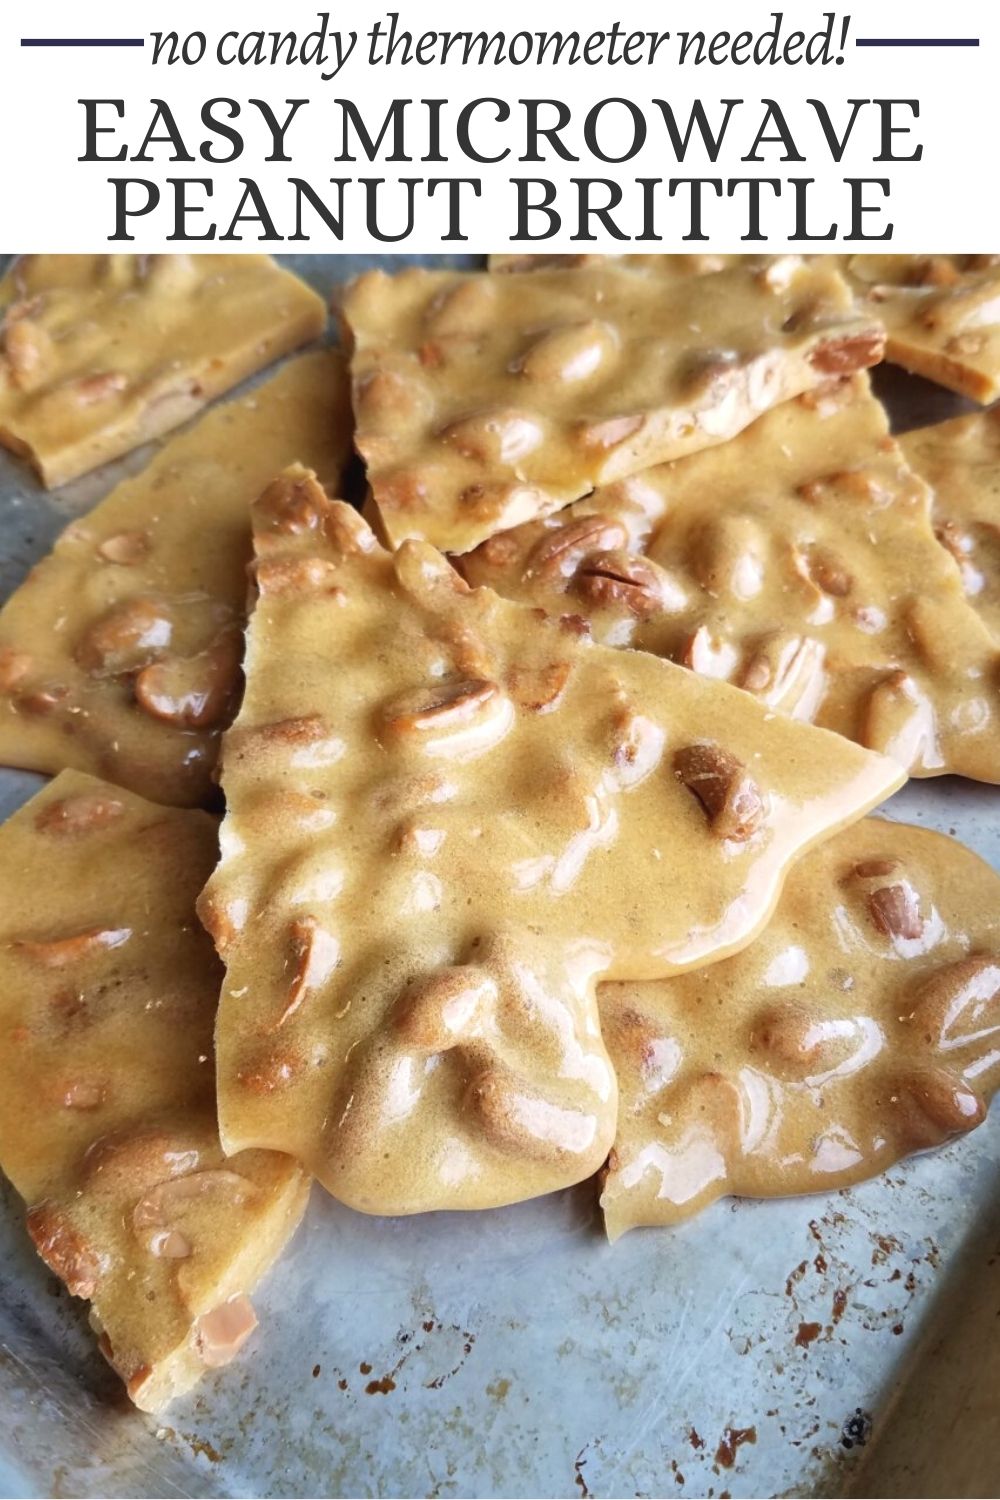 This microwave peanut brittle recipe allows you to make the crunchy caramelized candy at home without a candy thermometer. If you have a big glass bowl, a microwave and few simple ingredients you can make your own candy in no time at all.